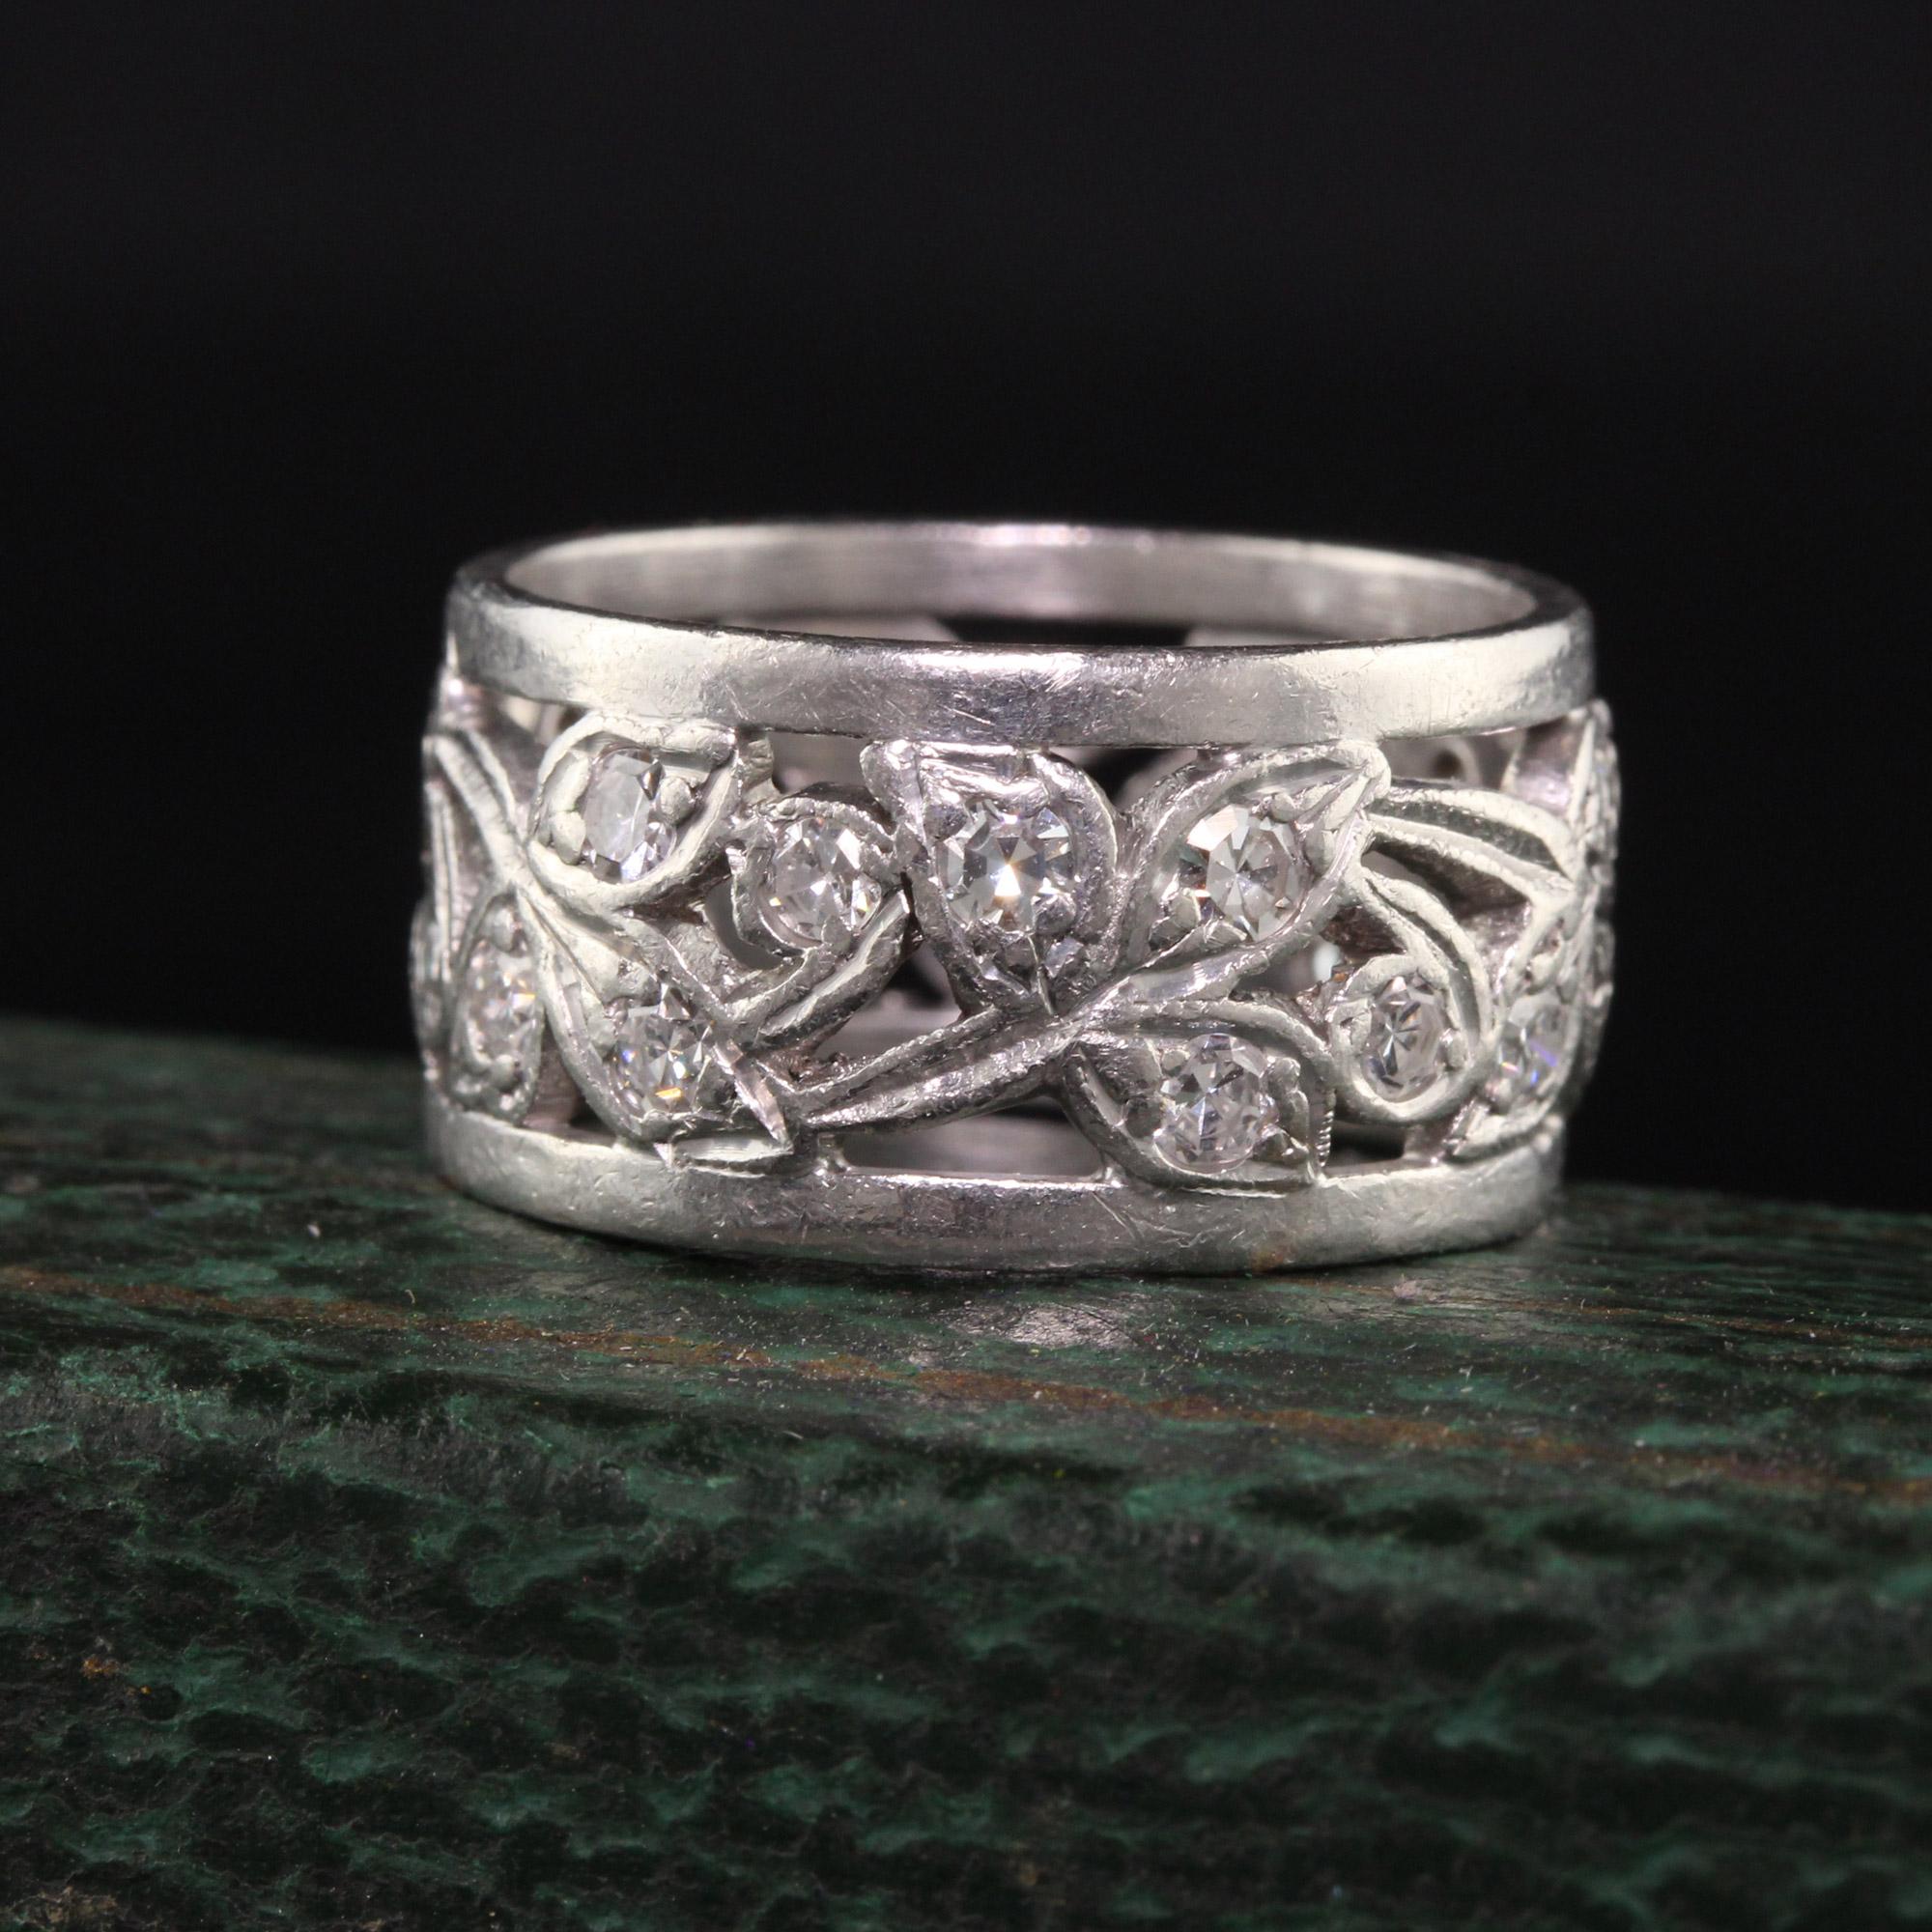 Beautiful Antique Art Deco Platinum Single Cut Diamond Floral Wide Eternity Band. This gorgeous band is crafted in platinum. There are single cut diamonds set in the flowers going around the entire ring. The ring is in good condition and is